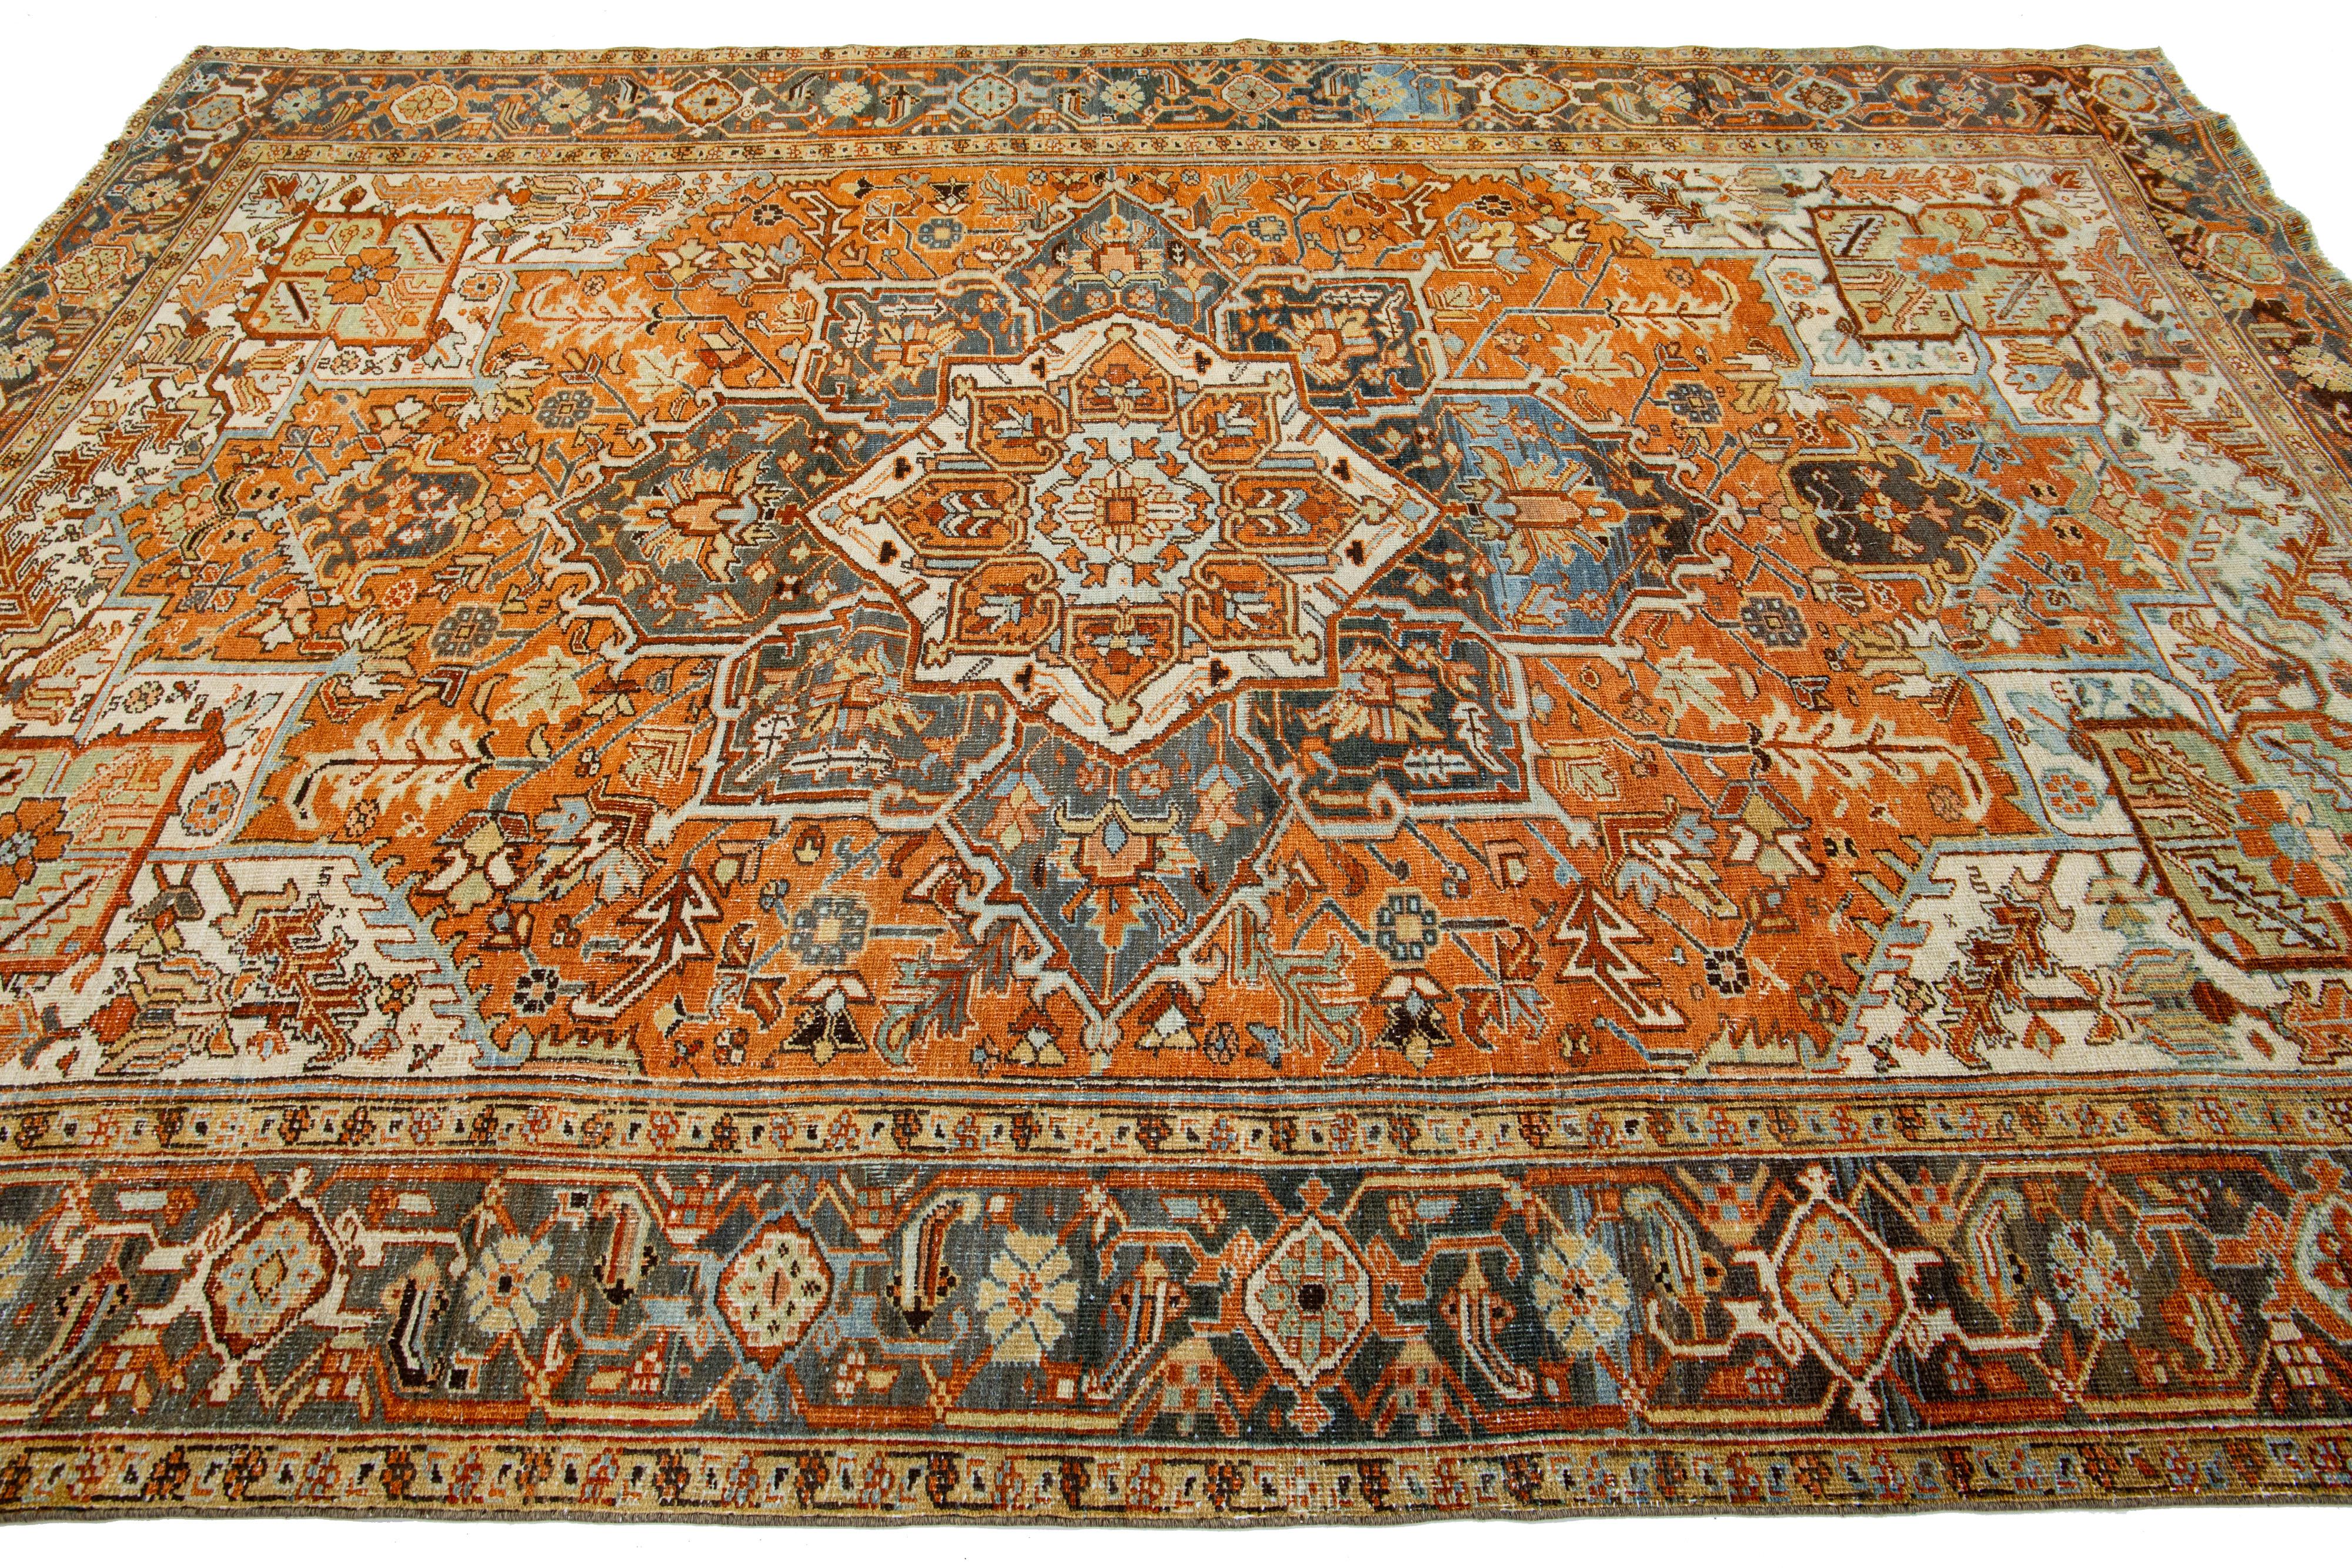 Hand-Knotted Persian 1910s Antique Heriz Medallion Wool Rug With Orange-Rust Color Design For Sale